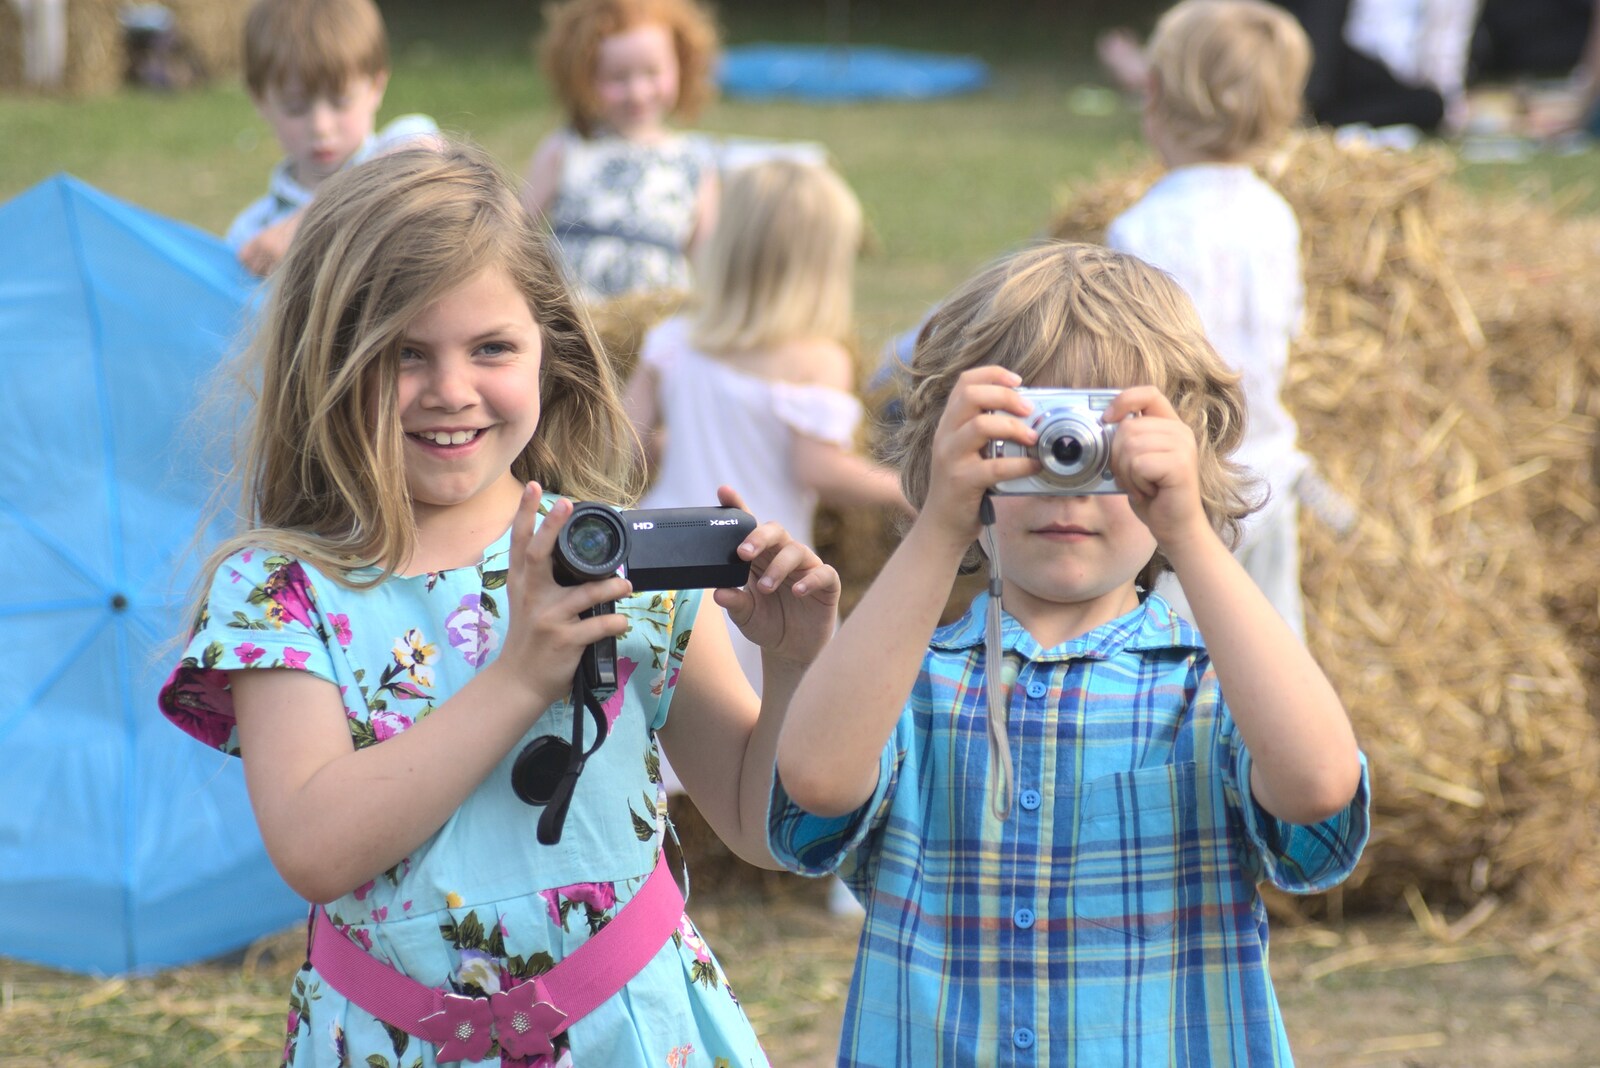 Sydney and Rowan with cameras from Nosher and Isobel's Wedding, Brome, Suffolk - 3rd July 2010